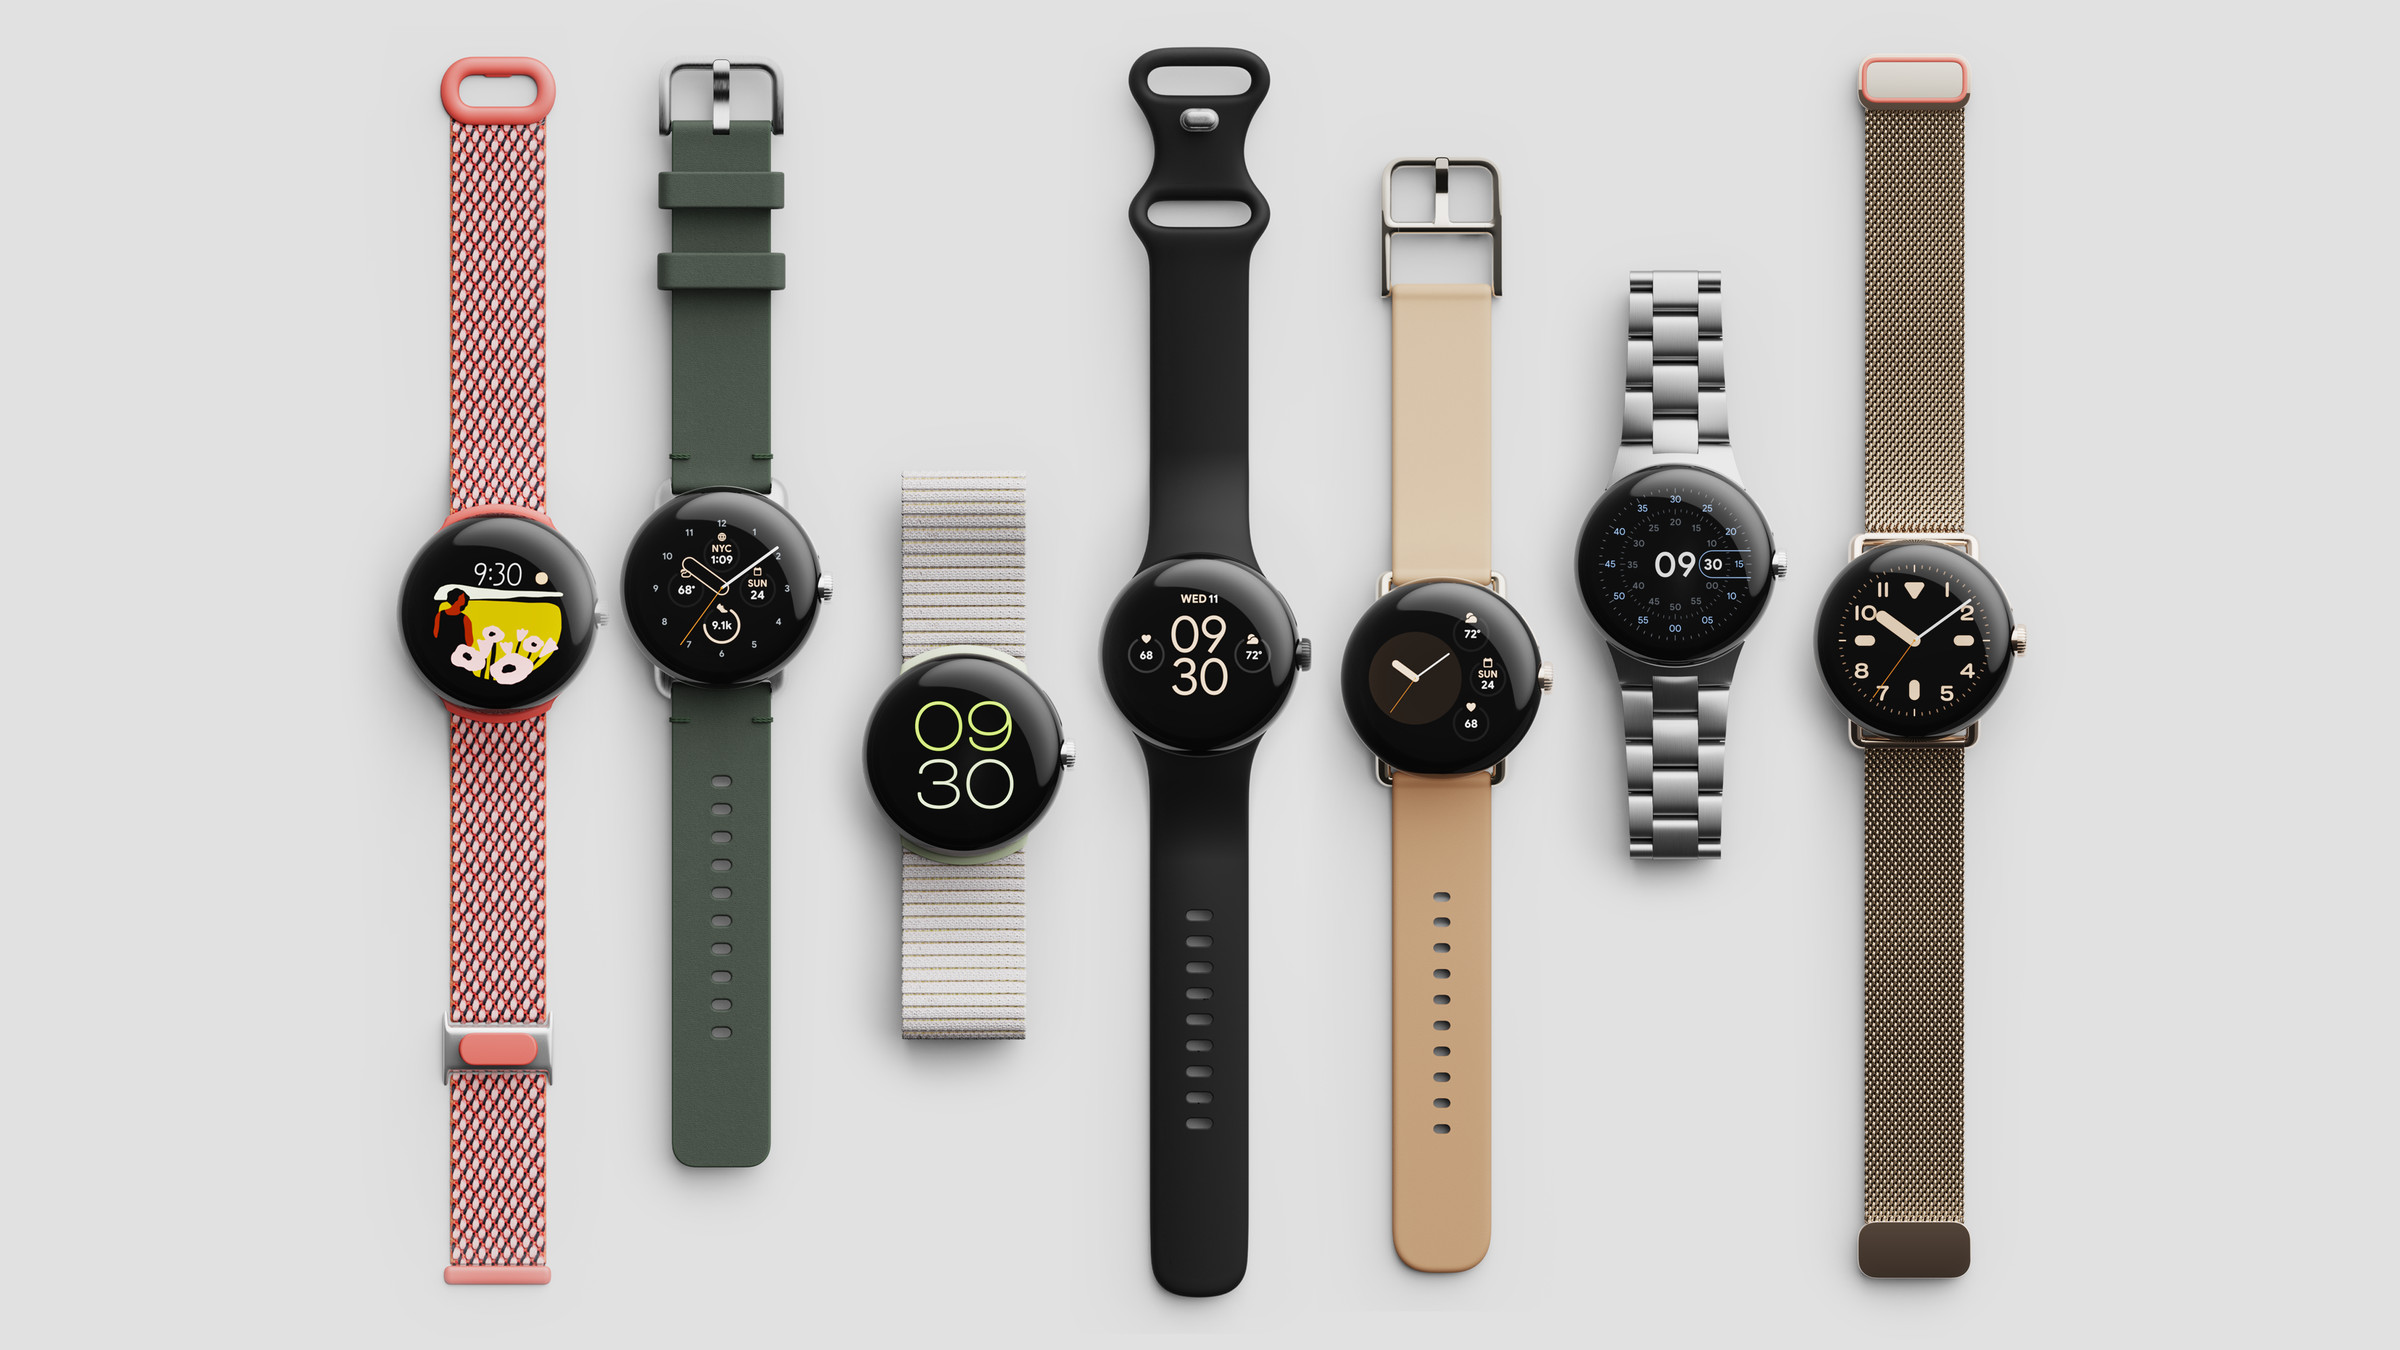 All the varieties of of Pixel Watch cases and bands side by side